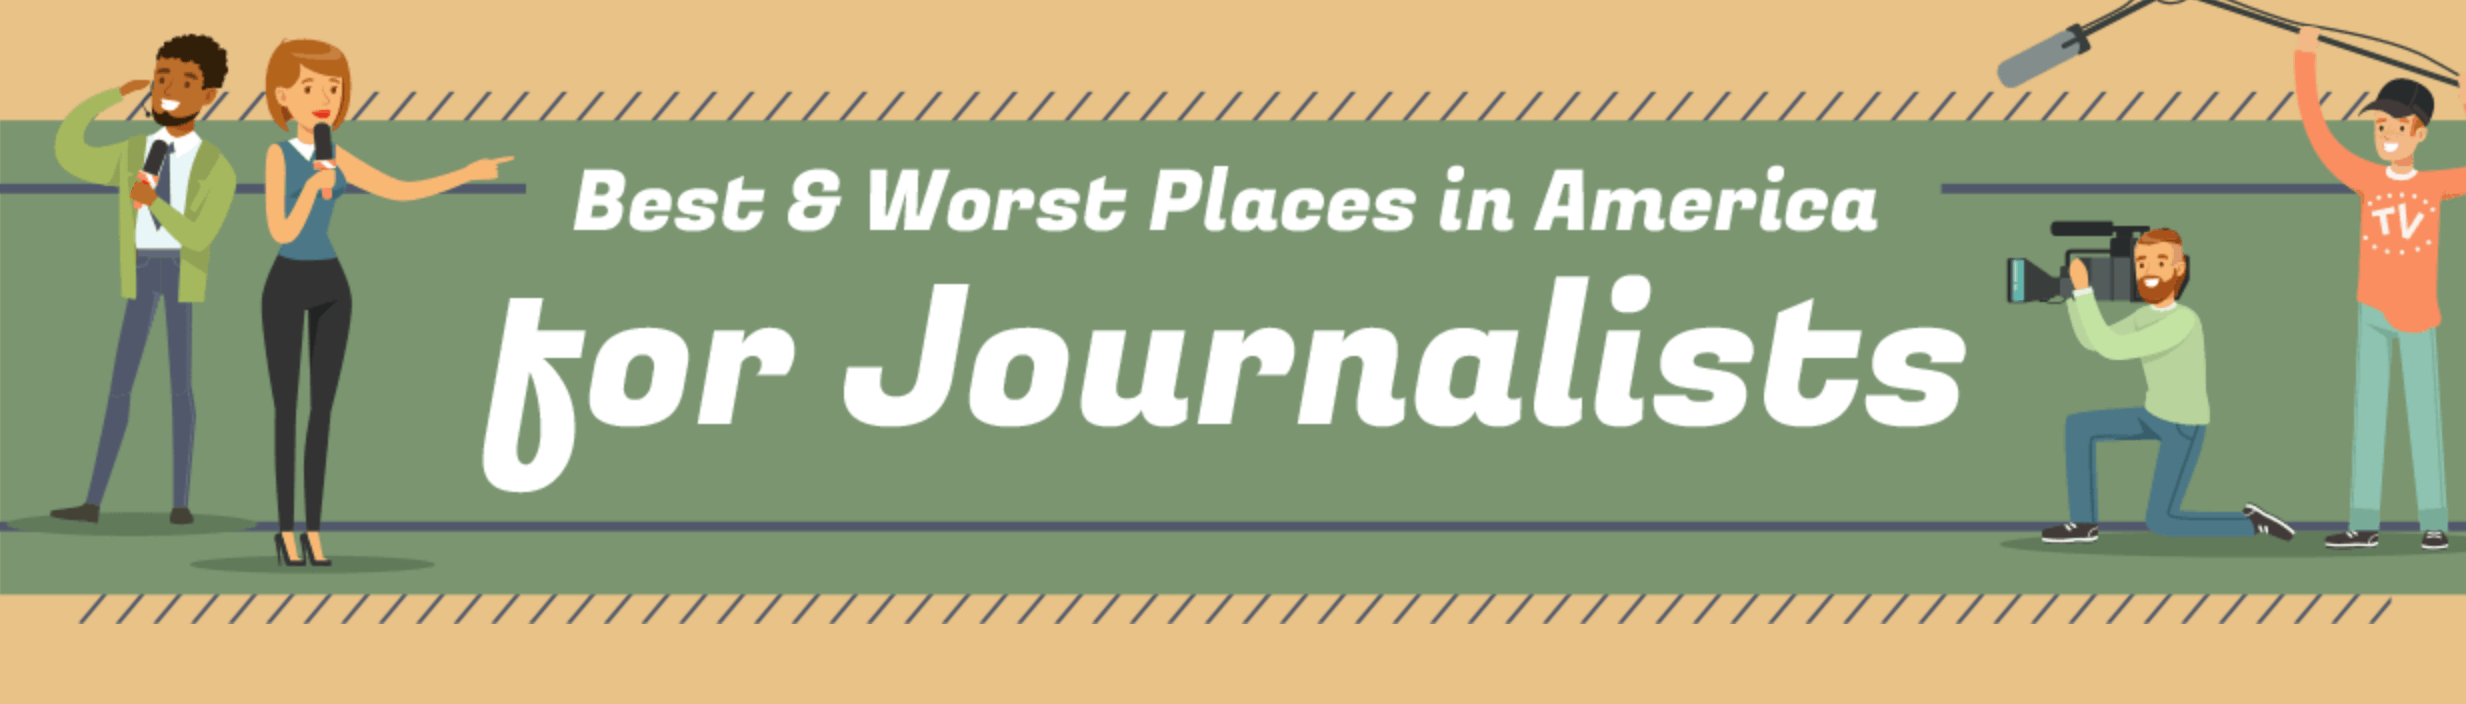 Best & Worst Places in America for Journalists Featured Image